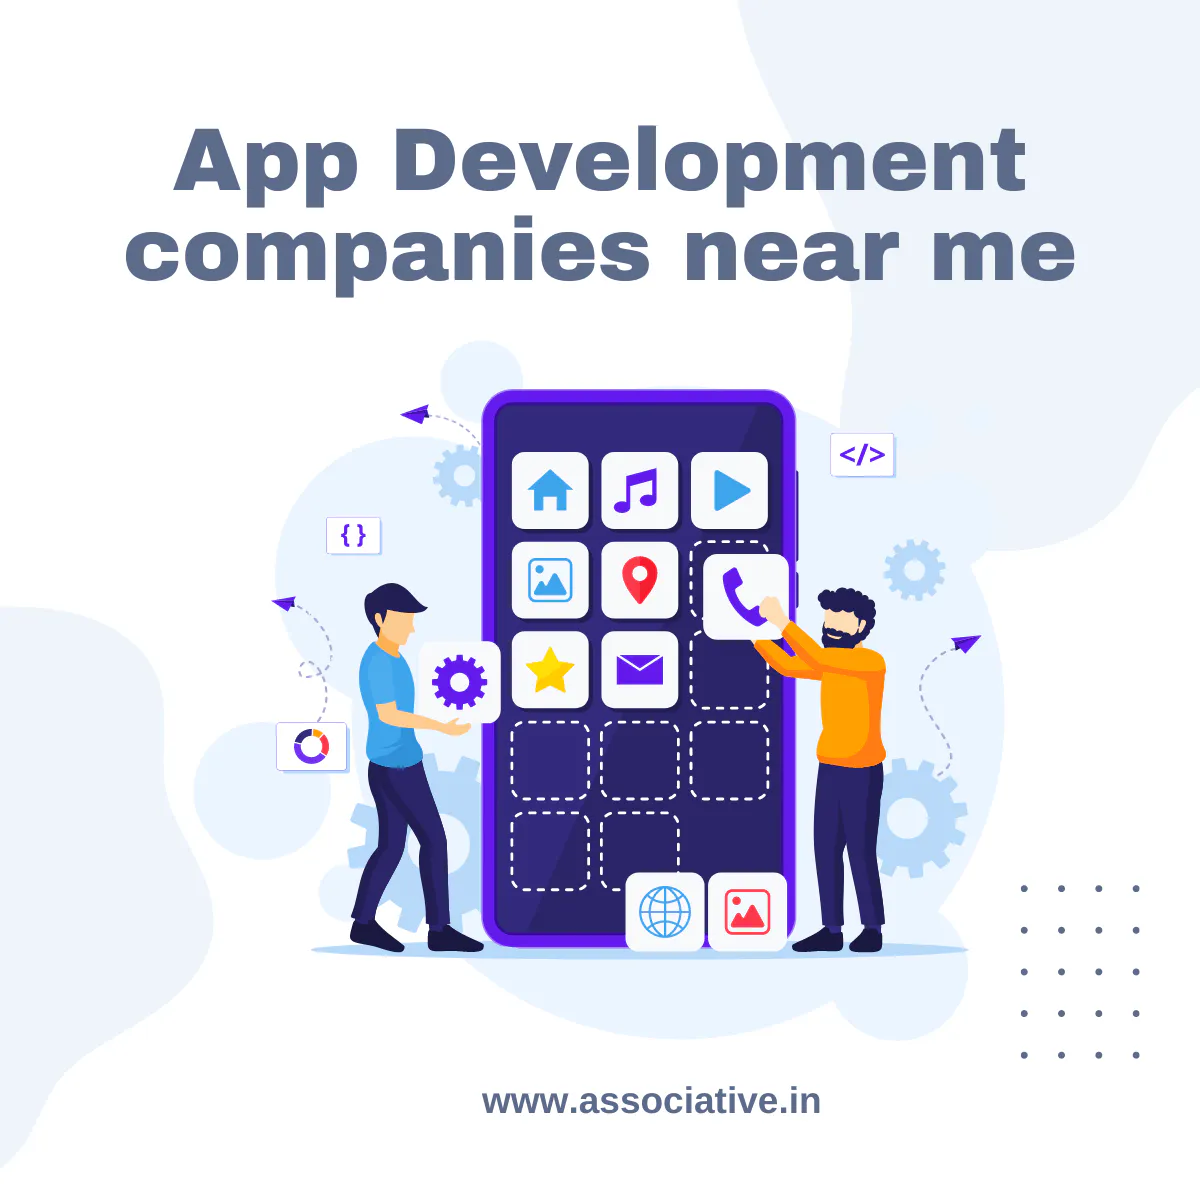 Application Developers: Partner with Associative to Build Your Dream App